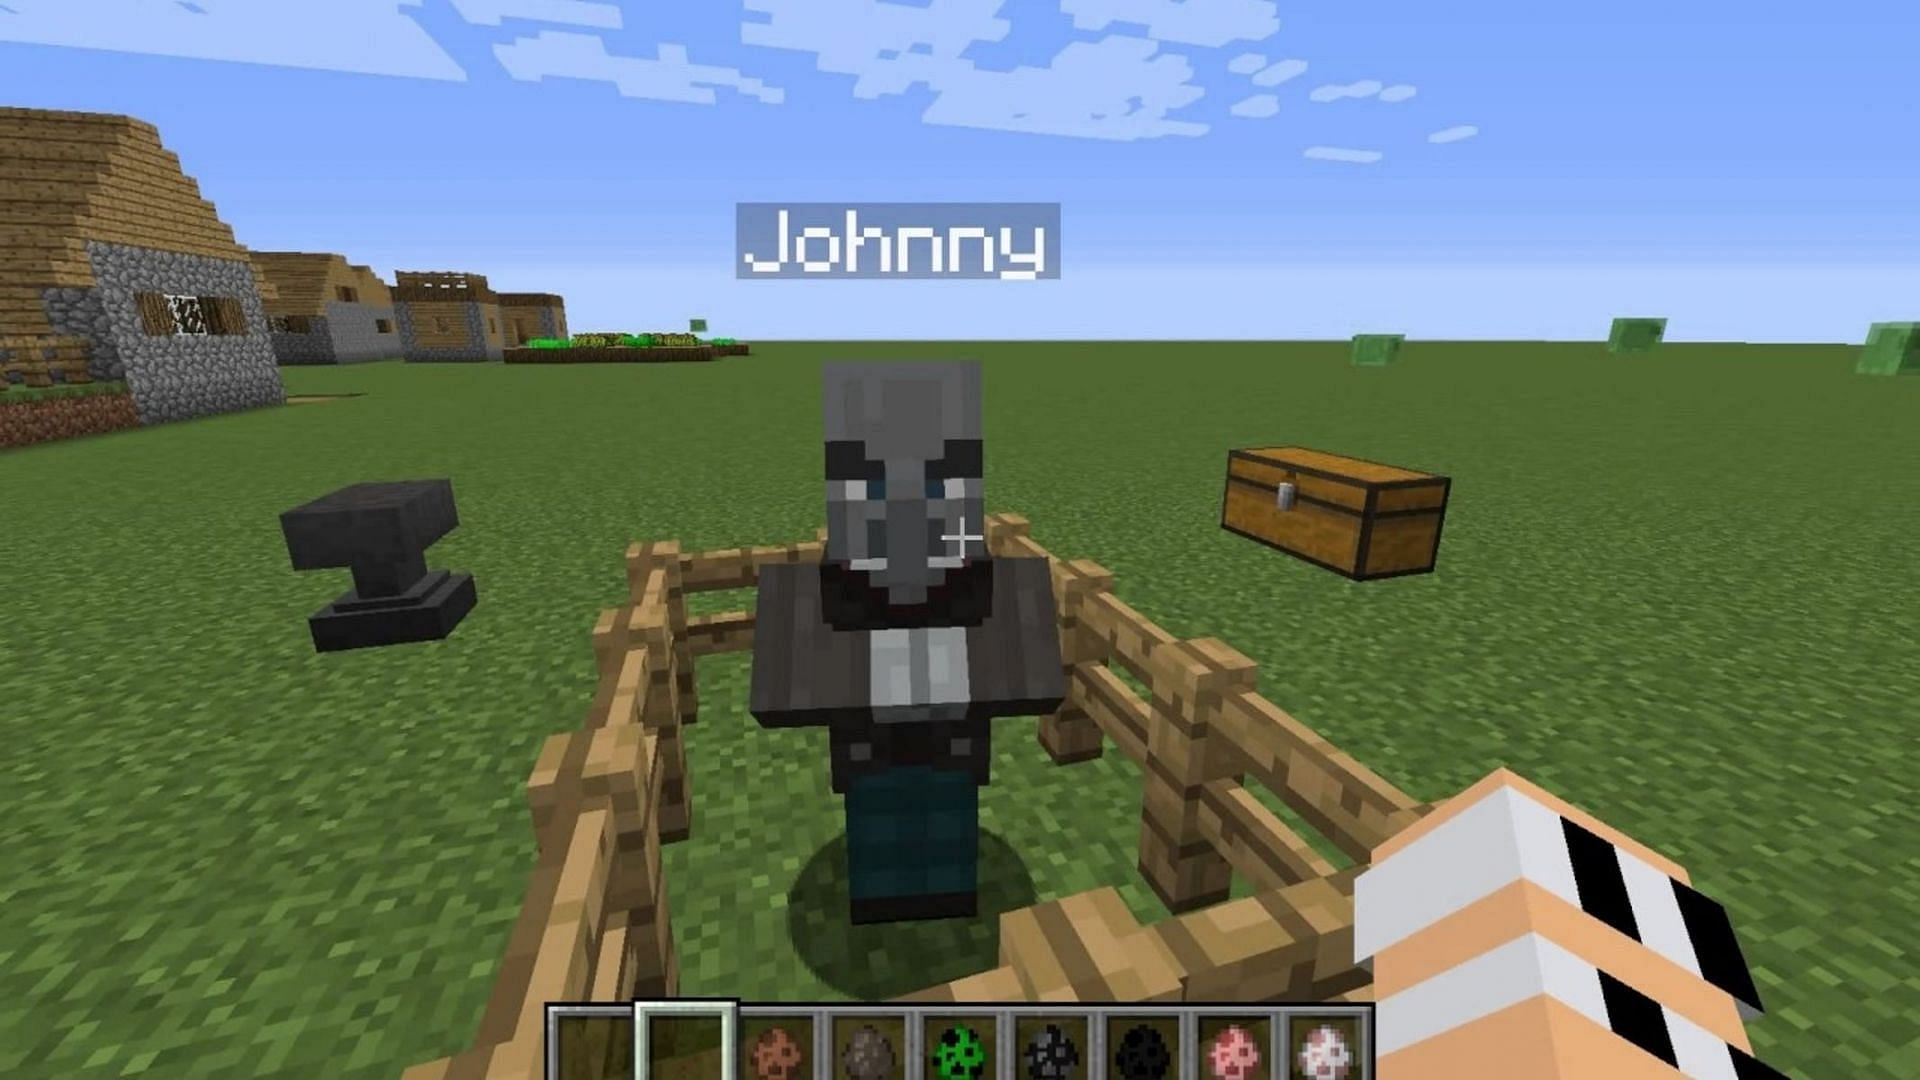 An illager named Johnny is capable of going on an axe-wielding rampage (Image via Mojang)